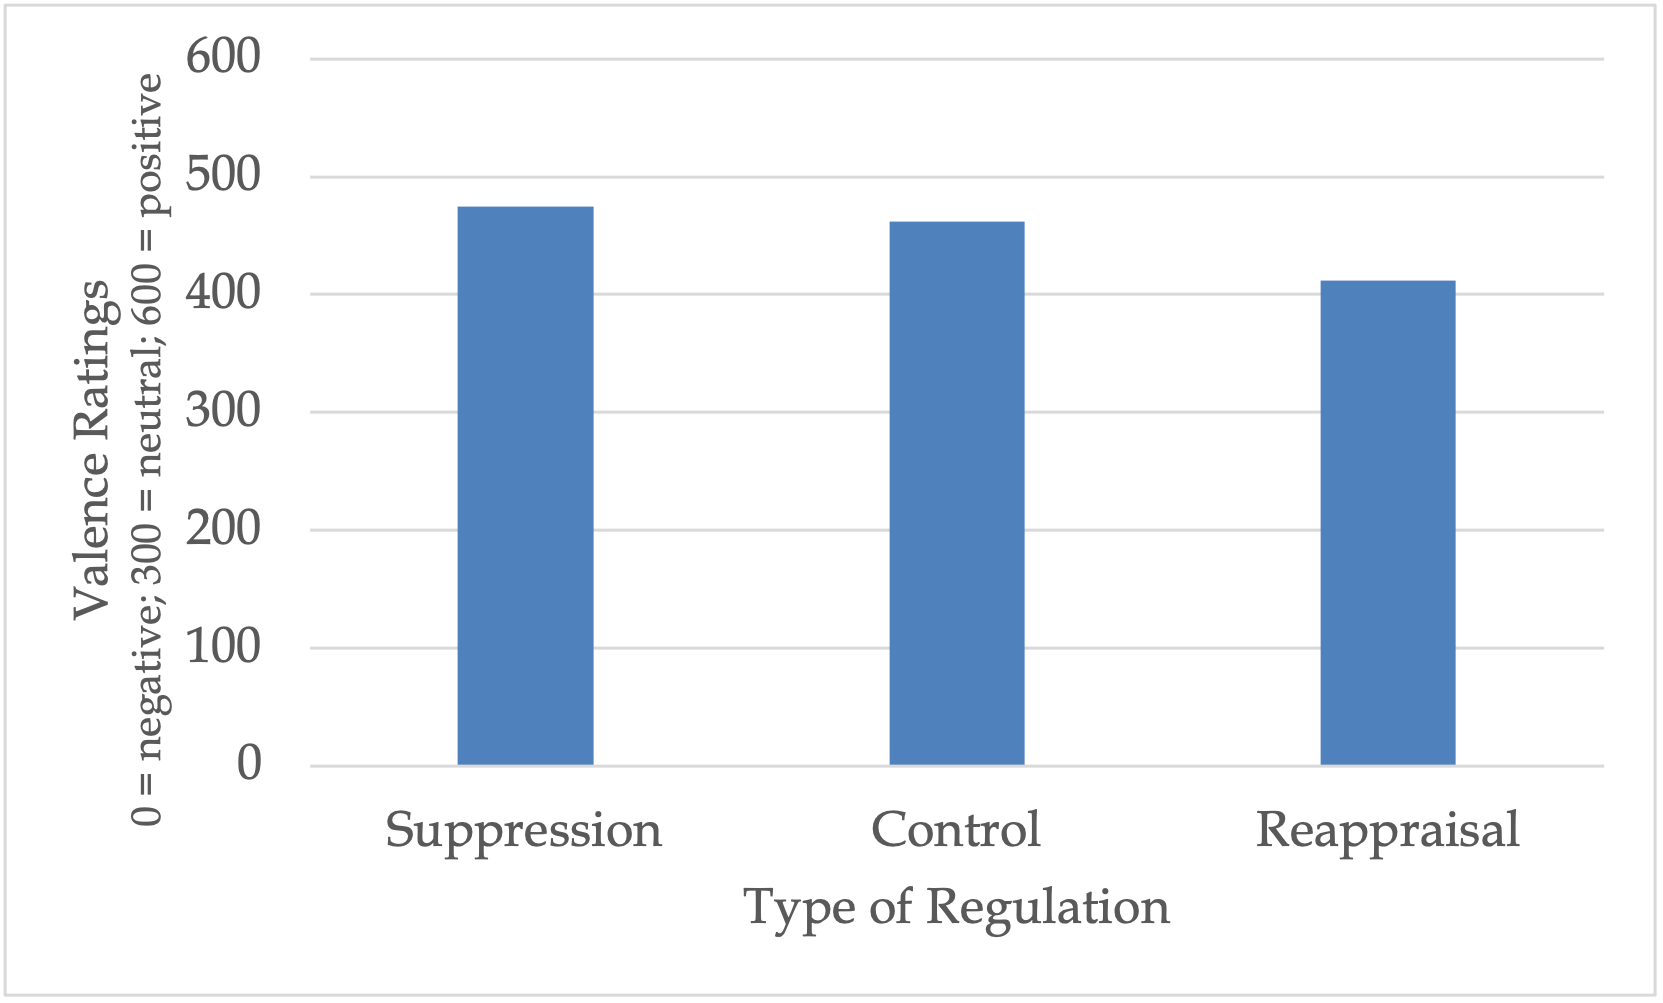 A graph with three bars. a bar for every type of regulation (suppression, control, reappraisal. x axis). The three types of regulation are graphed for Valence Ratings (y axis)